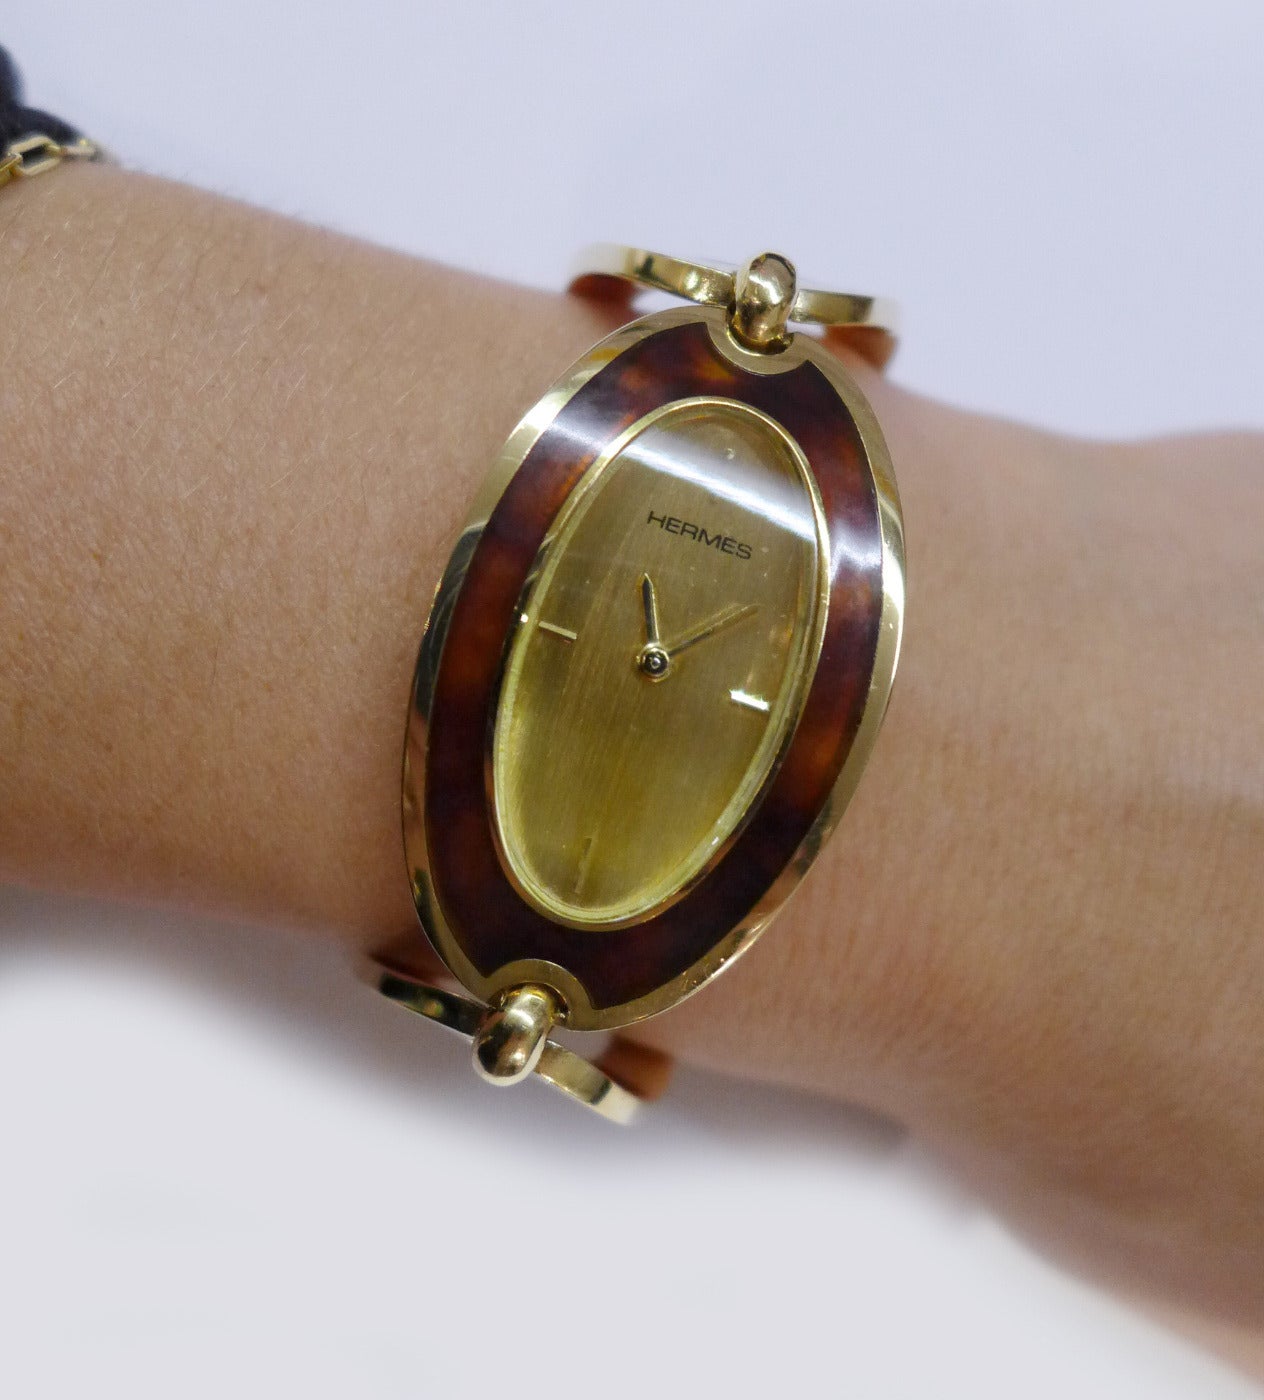 Women's Hermes Lady's Yellow Gold and Tortoise Shell Oval Wristwatch circa 1970s